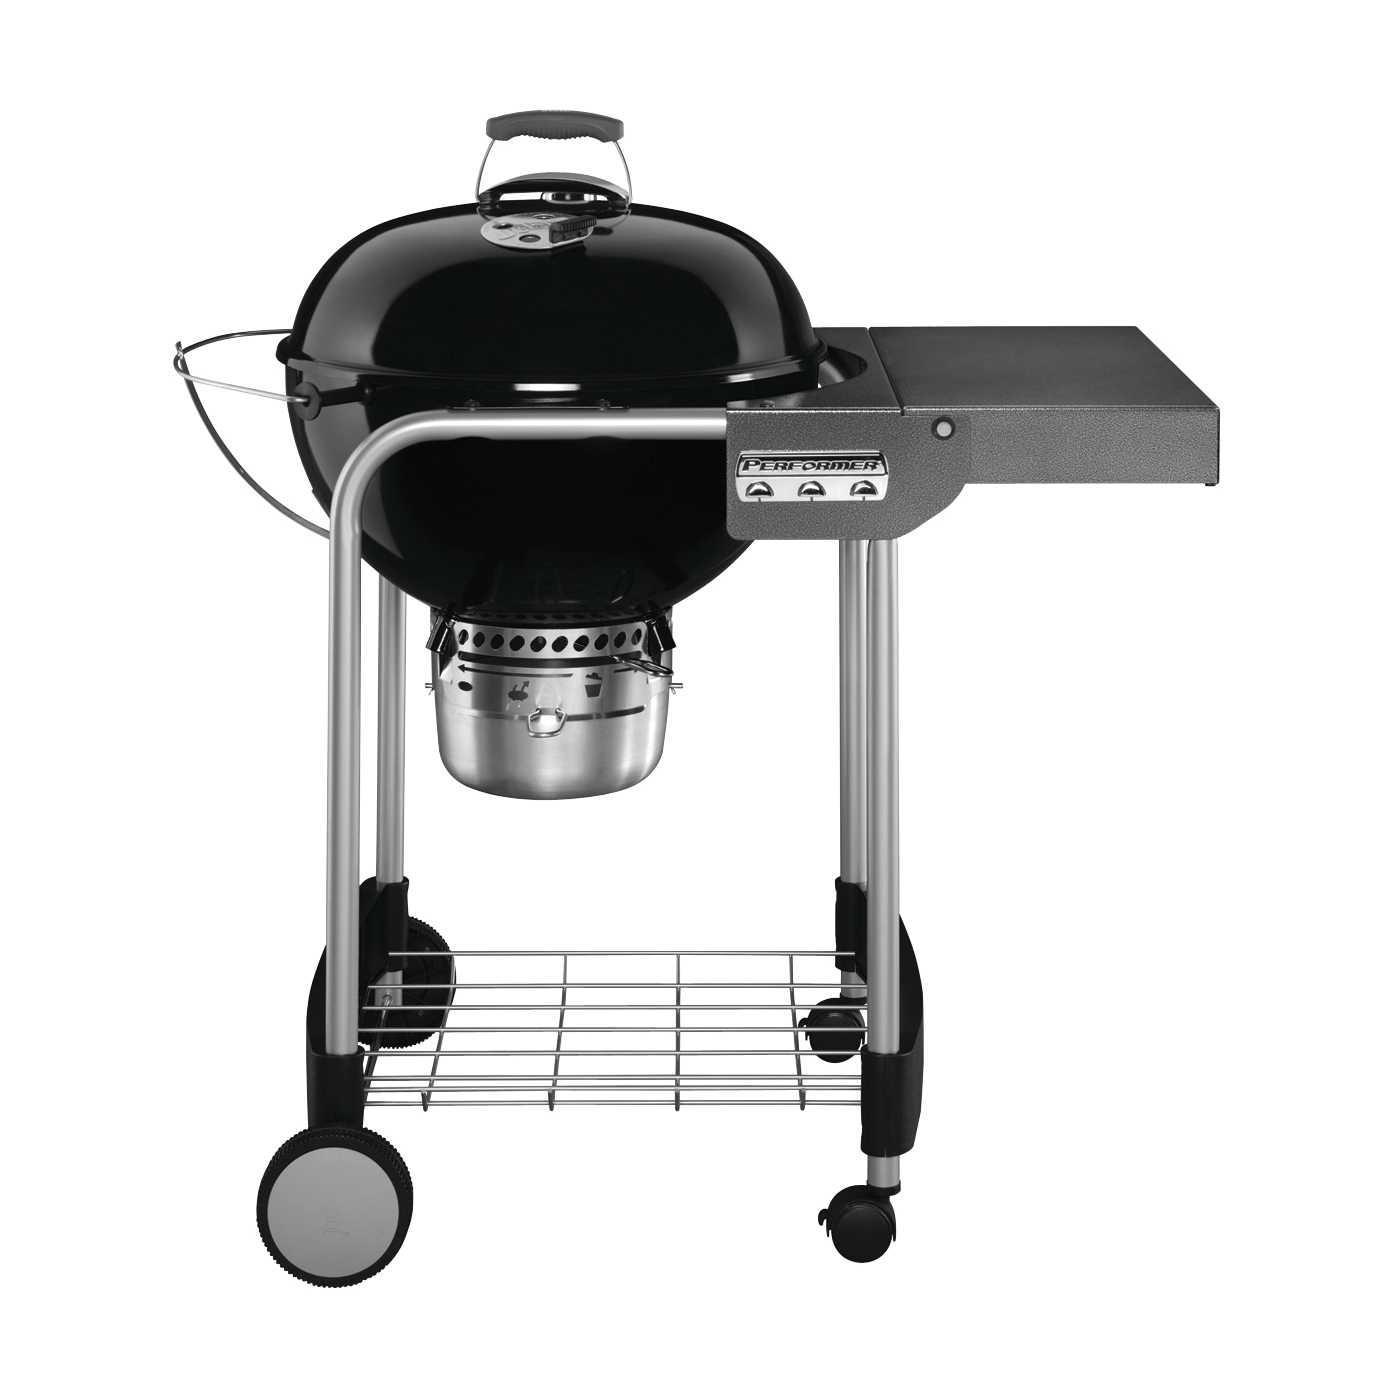 Performer 15301001 Charcoal Grill, 363 sq-in Primary Cooking Surface, Black